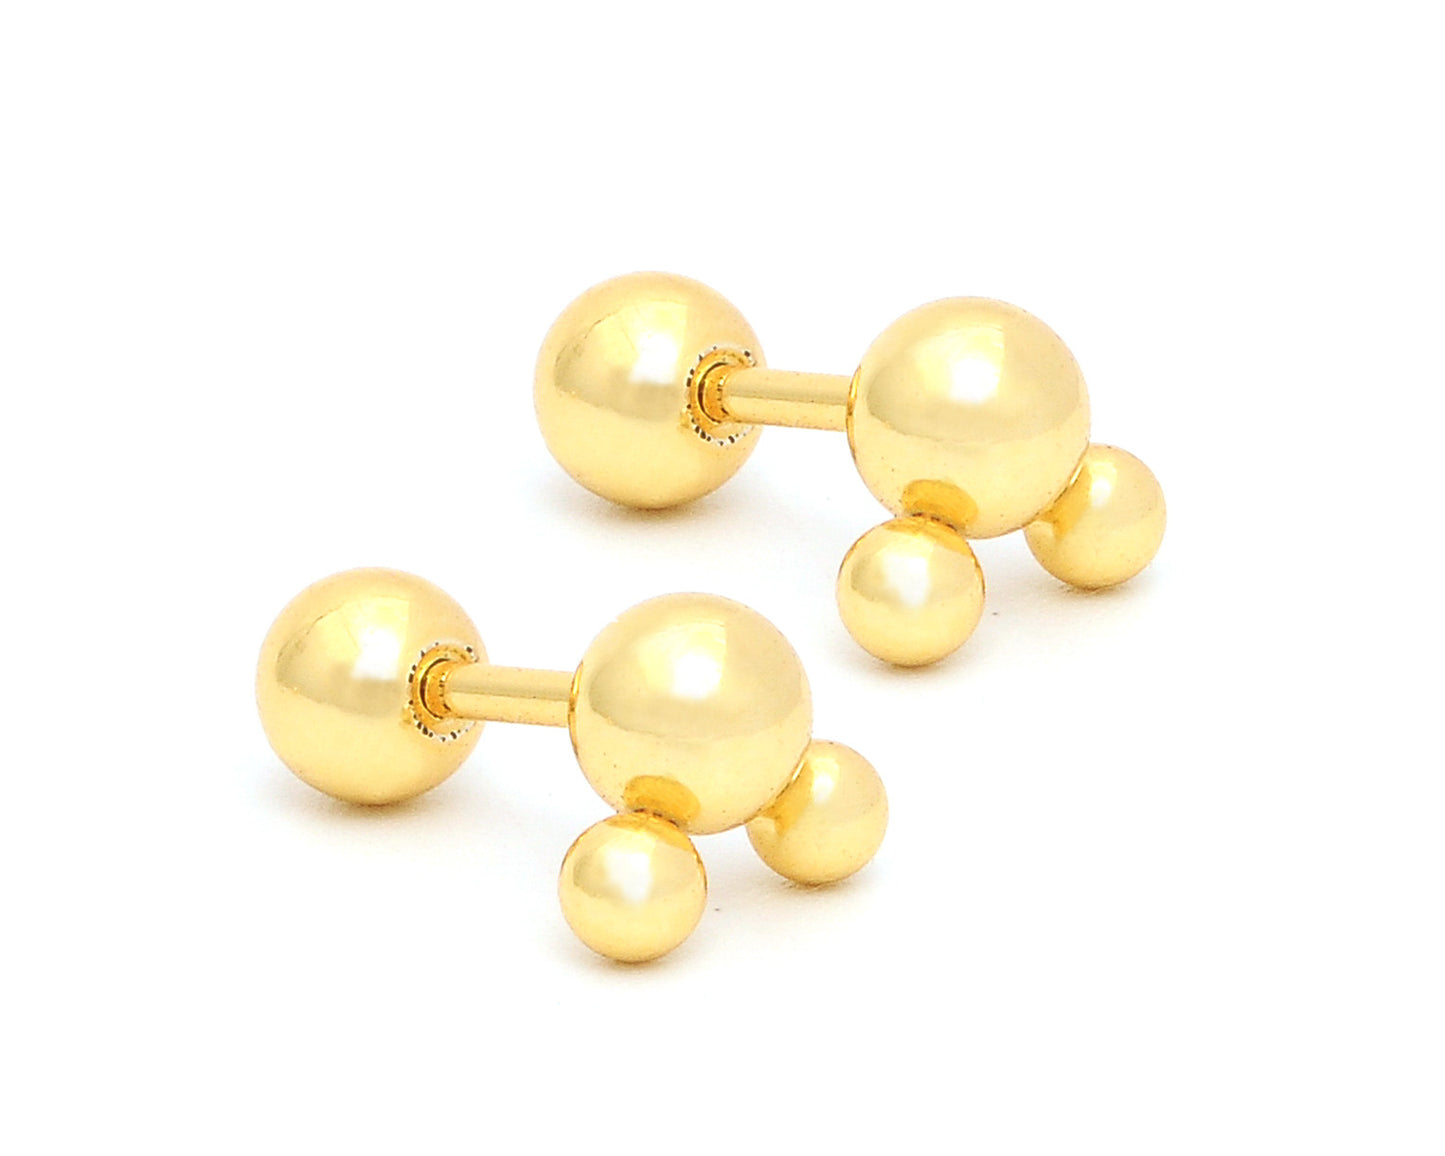 1 Yellow Powder Coated Stainless Three Studs Earrings